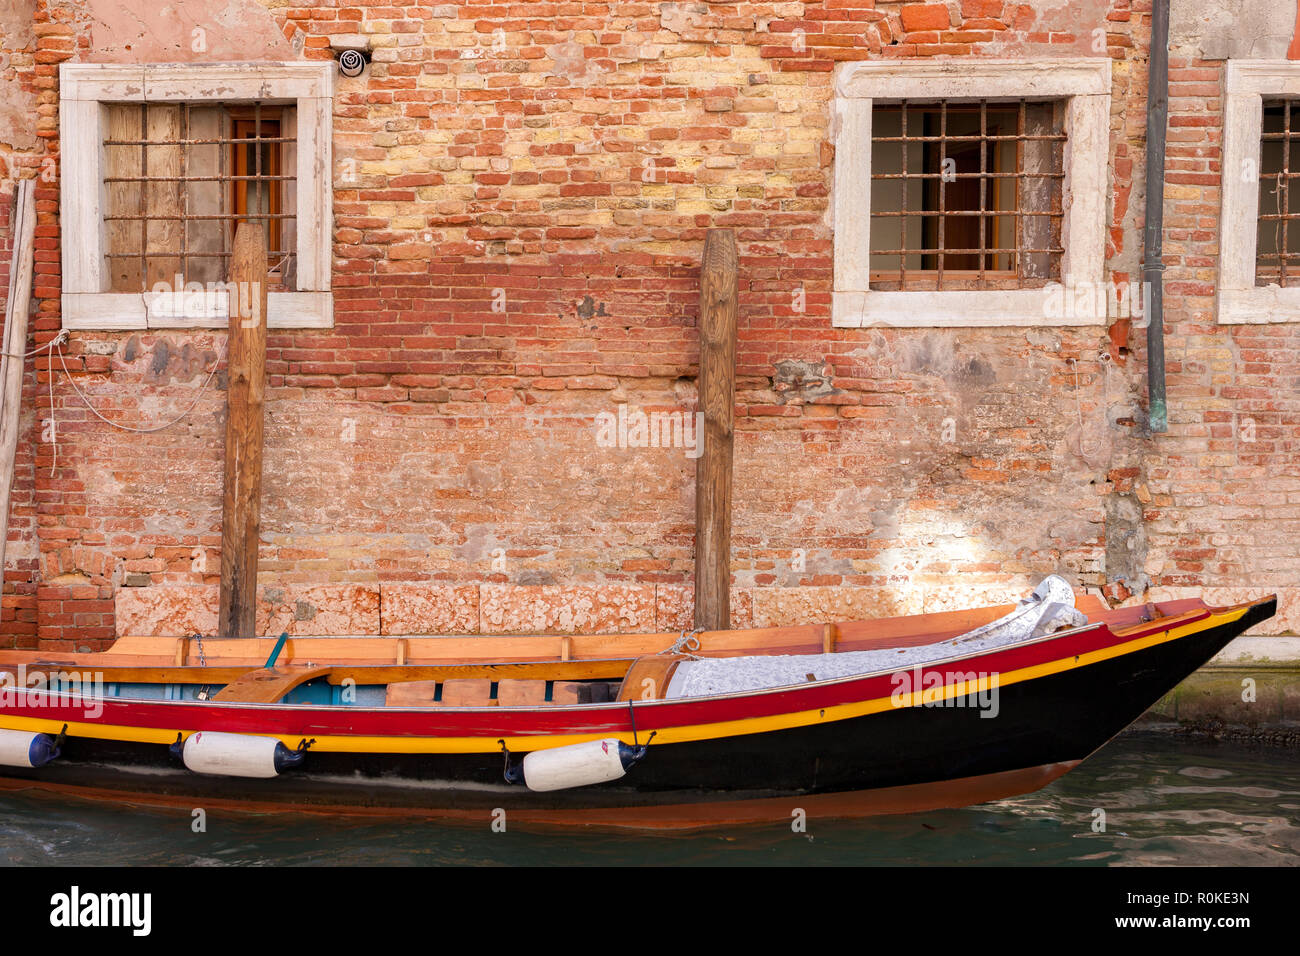 Red wooden boat moored in front of old colourful brick builings in Venice Italy Stock Photo